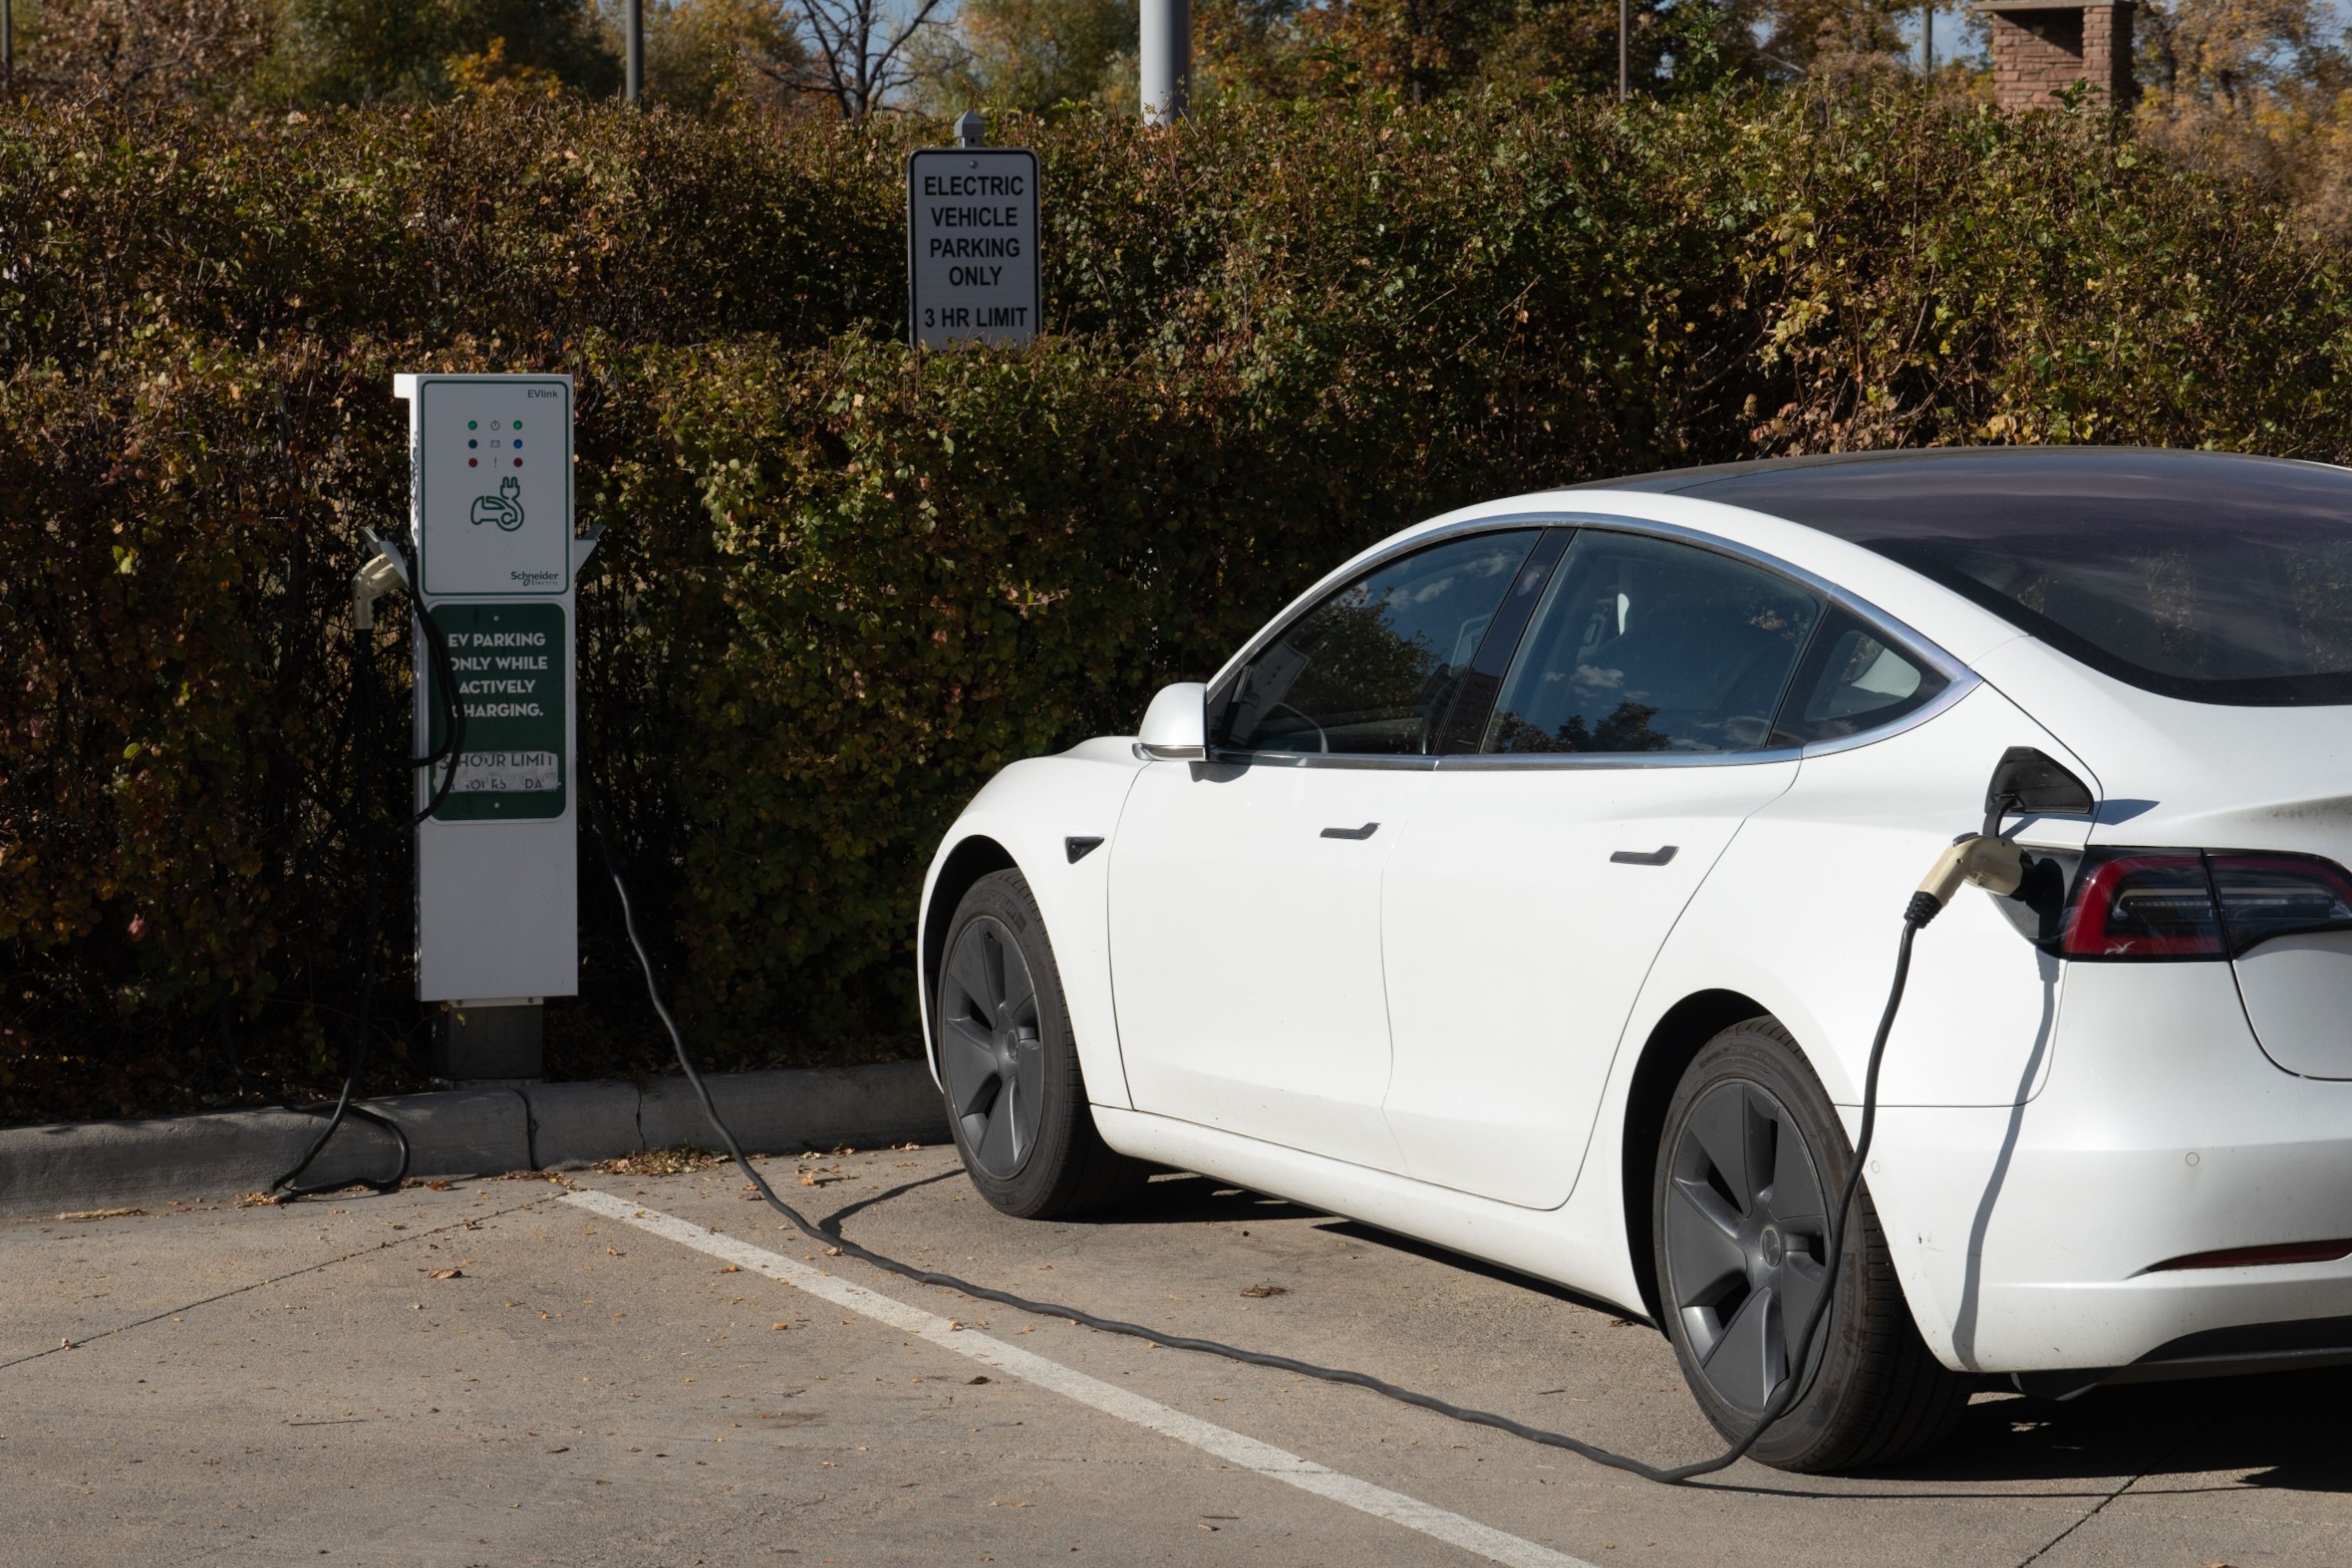 PHOTO: Charging a car at an electric vehicle charging station in Colorado. 